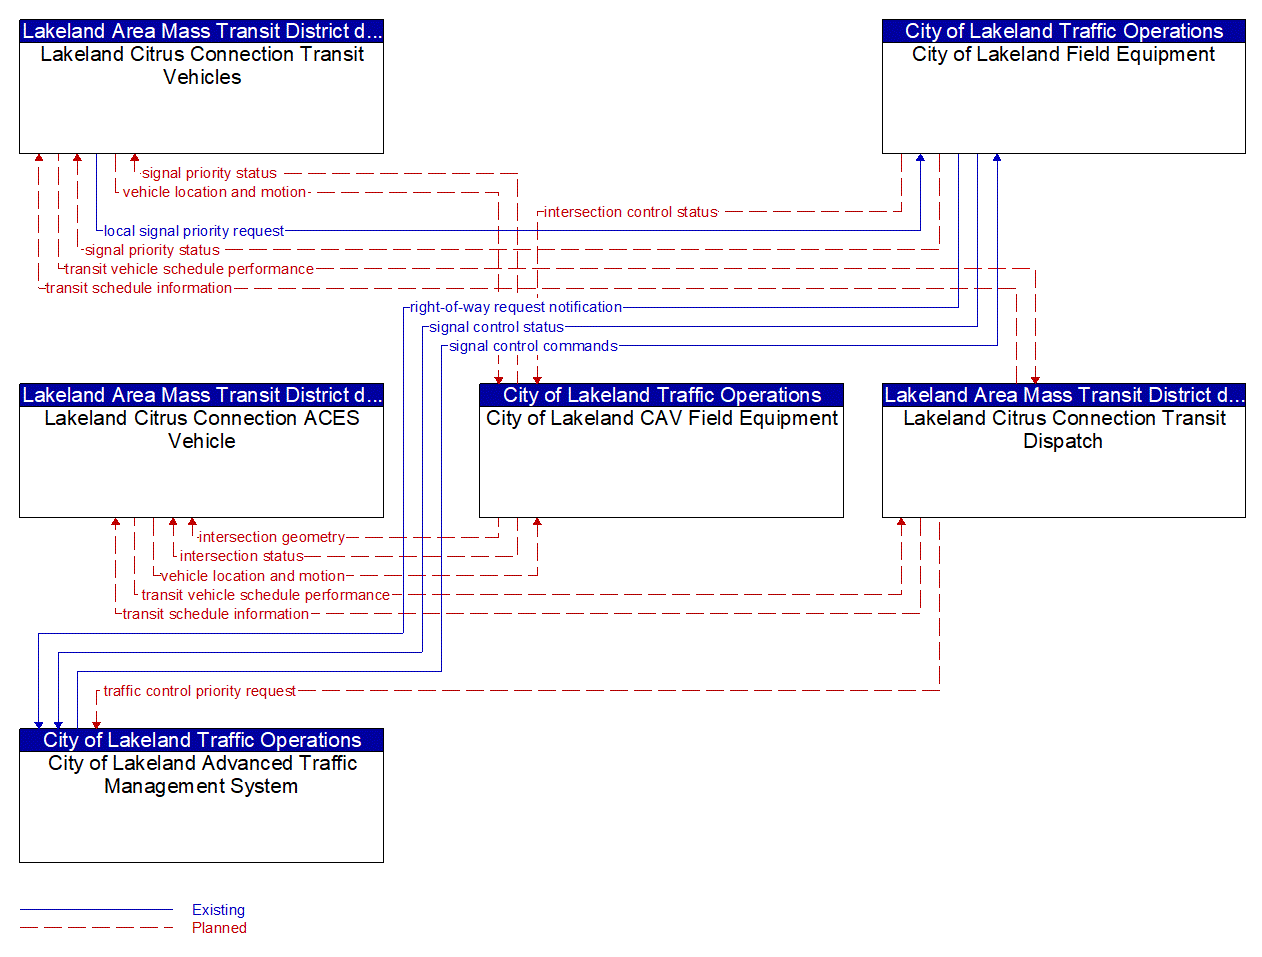 Service Graphic: Transit Signal Priority (Lakeland Automated/Connected/Electric/Shared (ACES) Projects)